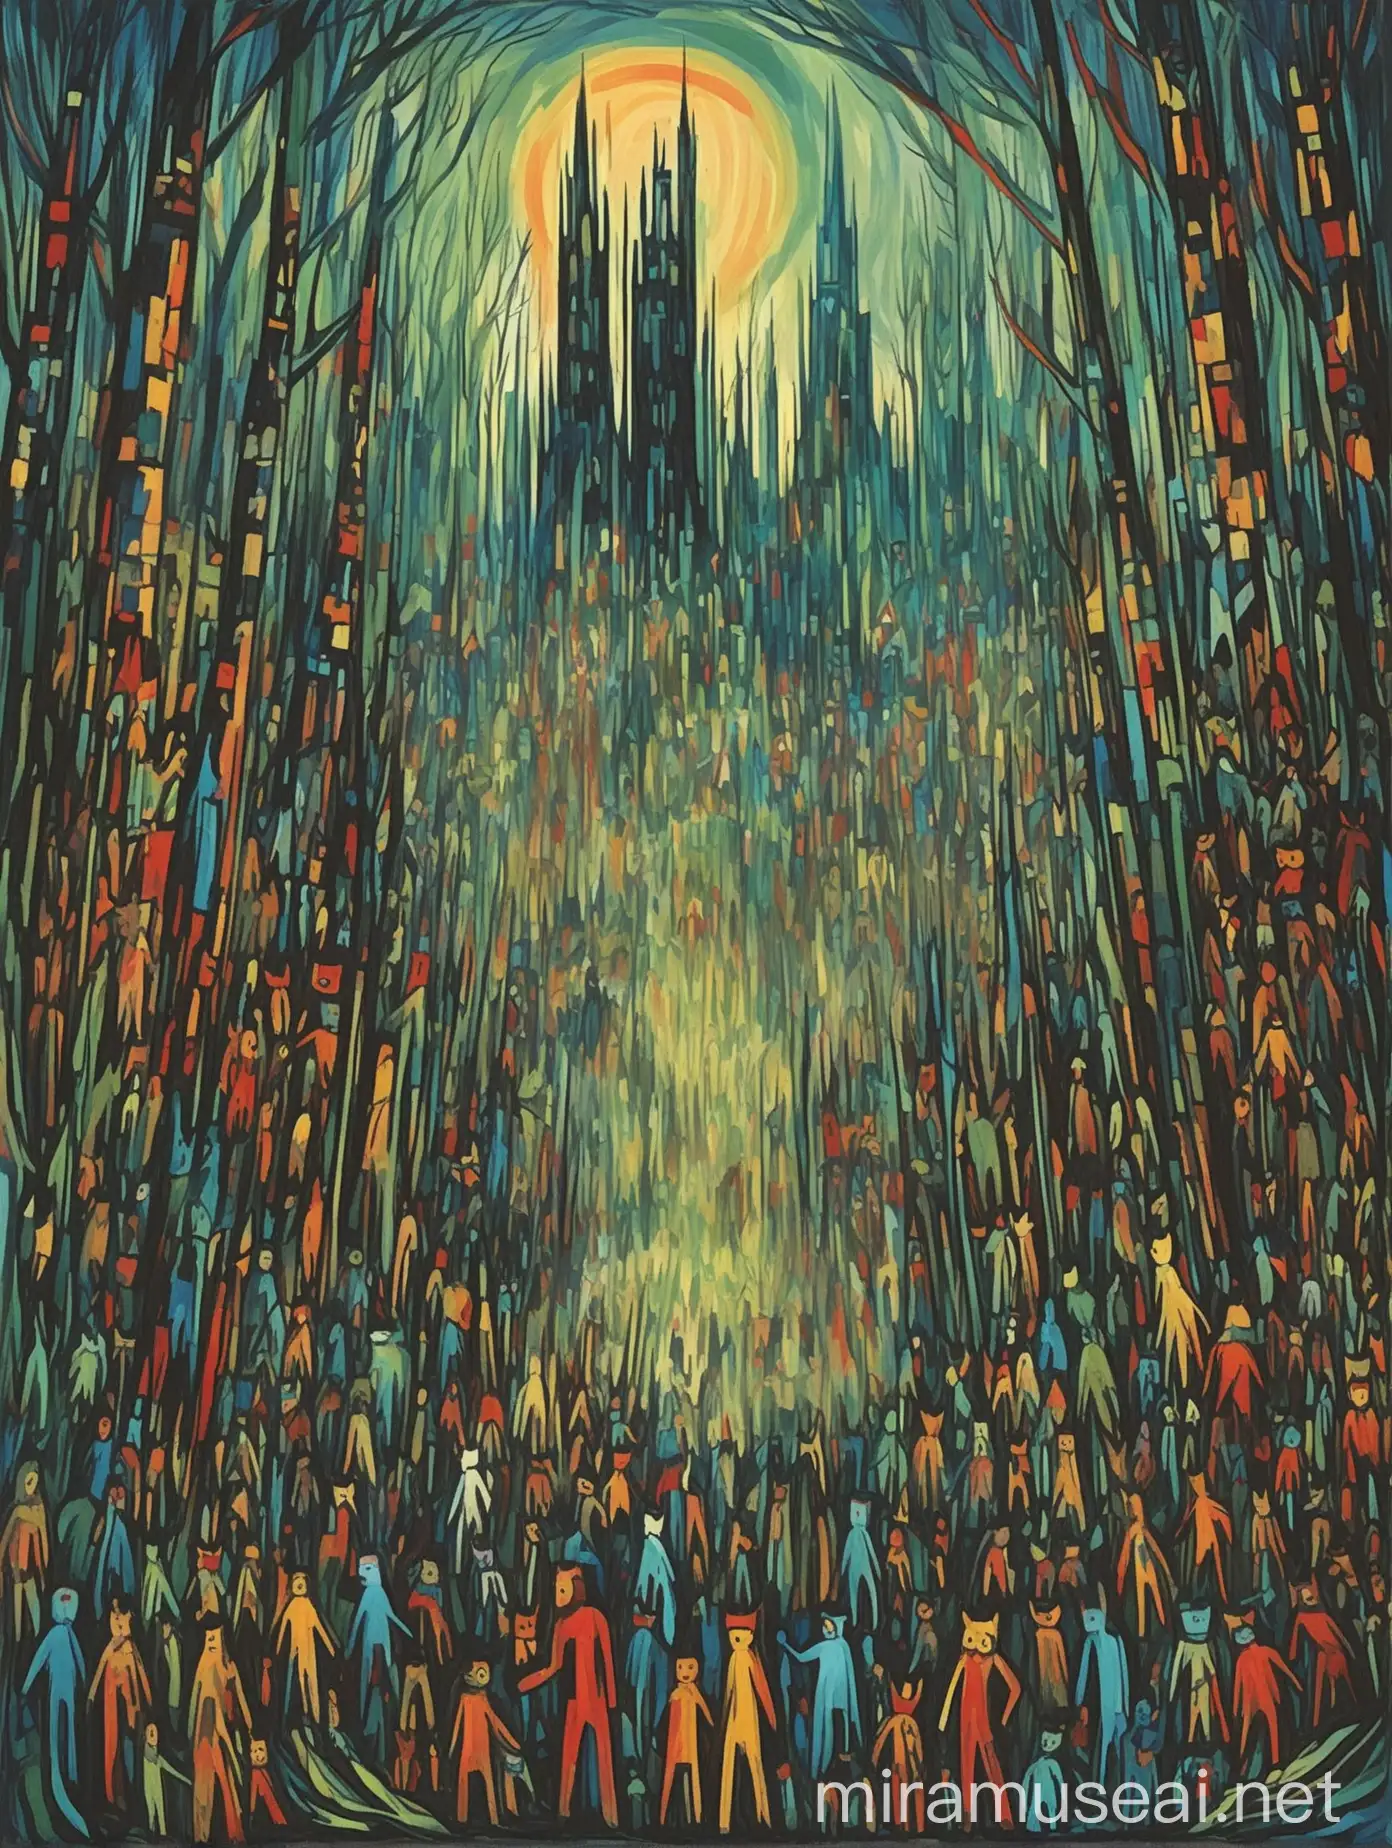 An expressionistic image of the forest and wild people and the towers that occupy the forest